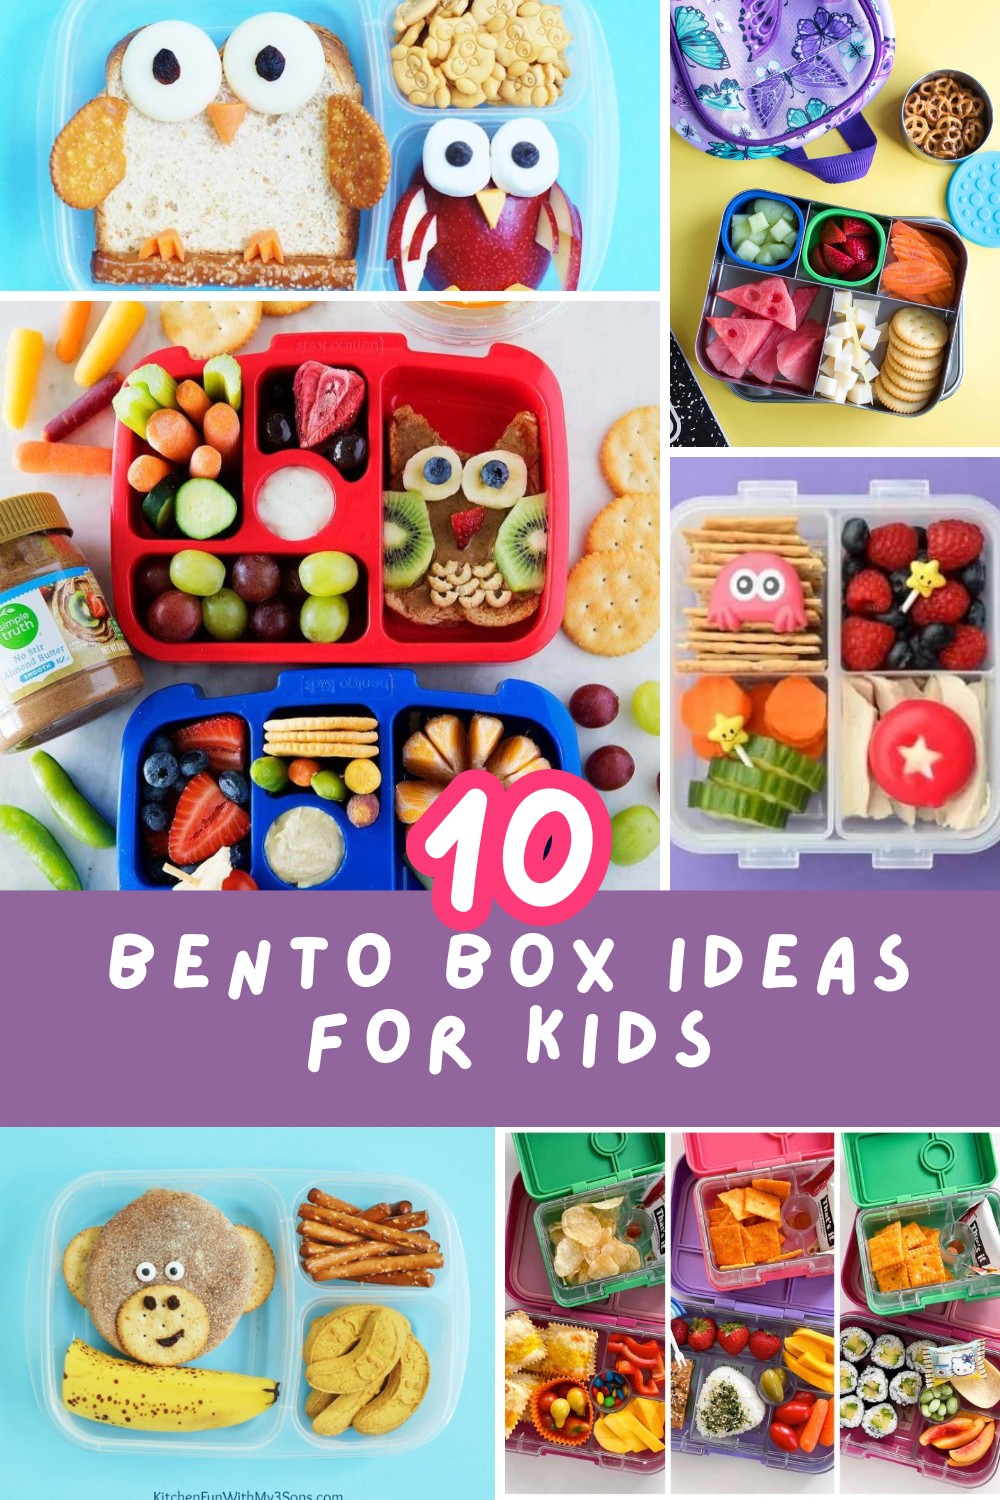 Struggling with meal prep for your little ones? Check out these 10+ awesome bento box lunch ideas that are perfect for picky eaters, kids with allergies, or special diets. Get creative and make lunchtime fun and nutritious! 🍱🧒 #BentoBox #KidsLunch #MealPrep